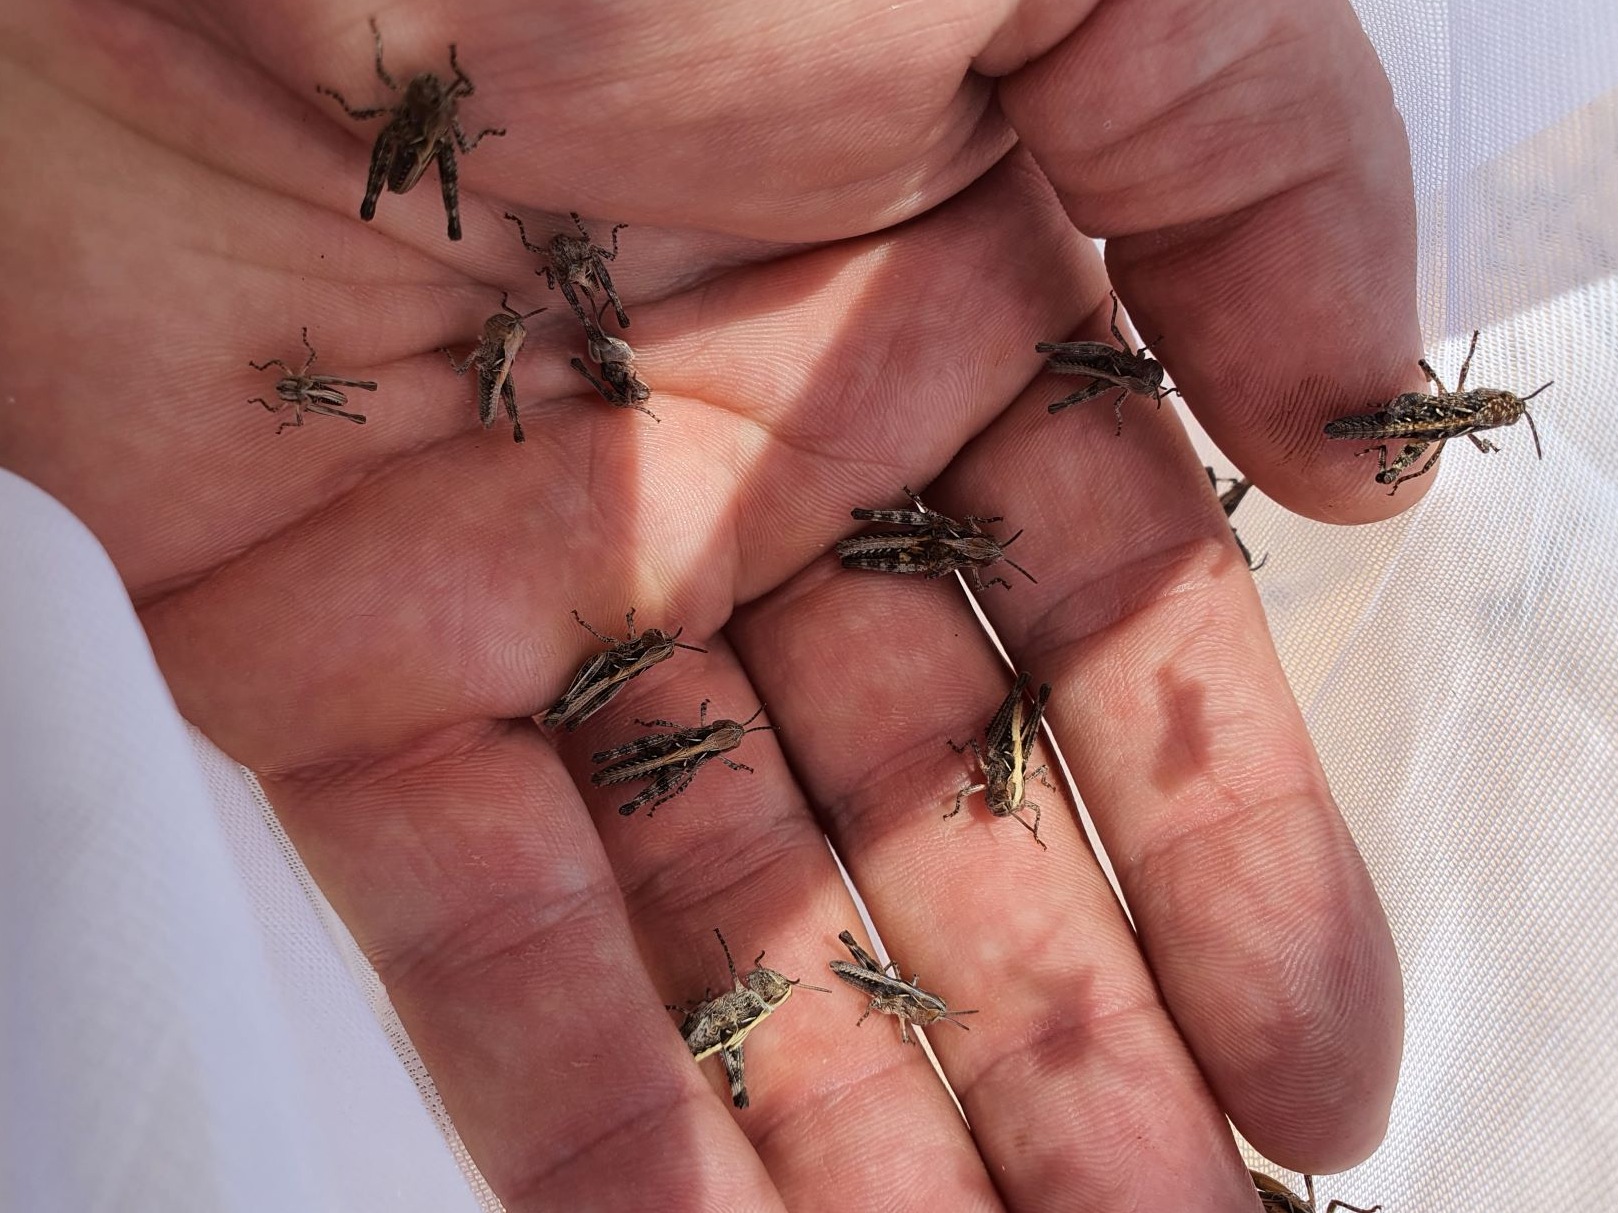 Human hand with several immature locusts on it.